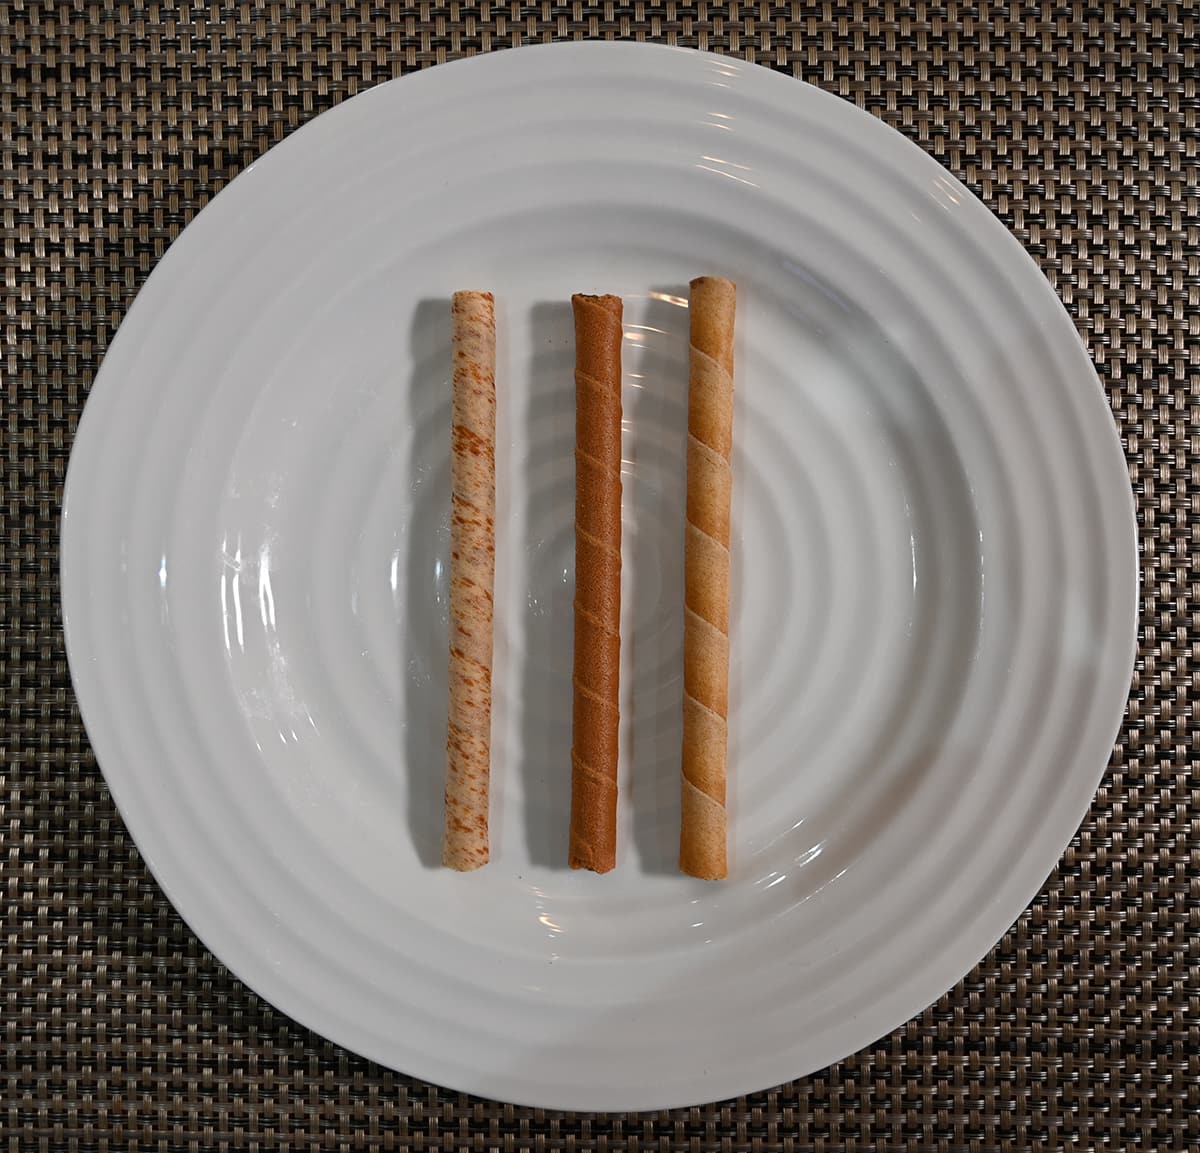 Top down image of three rolled wafers on a plate, vanilla, chocolate and hazelnut.